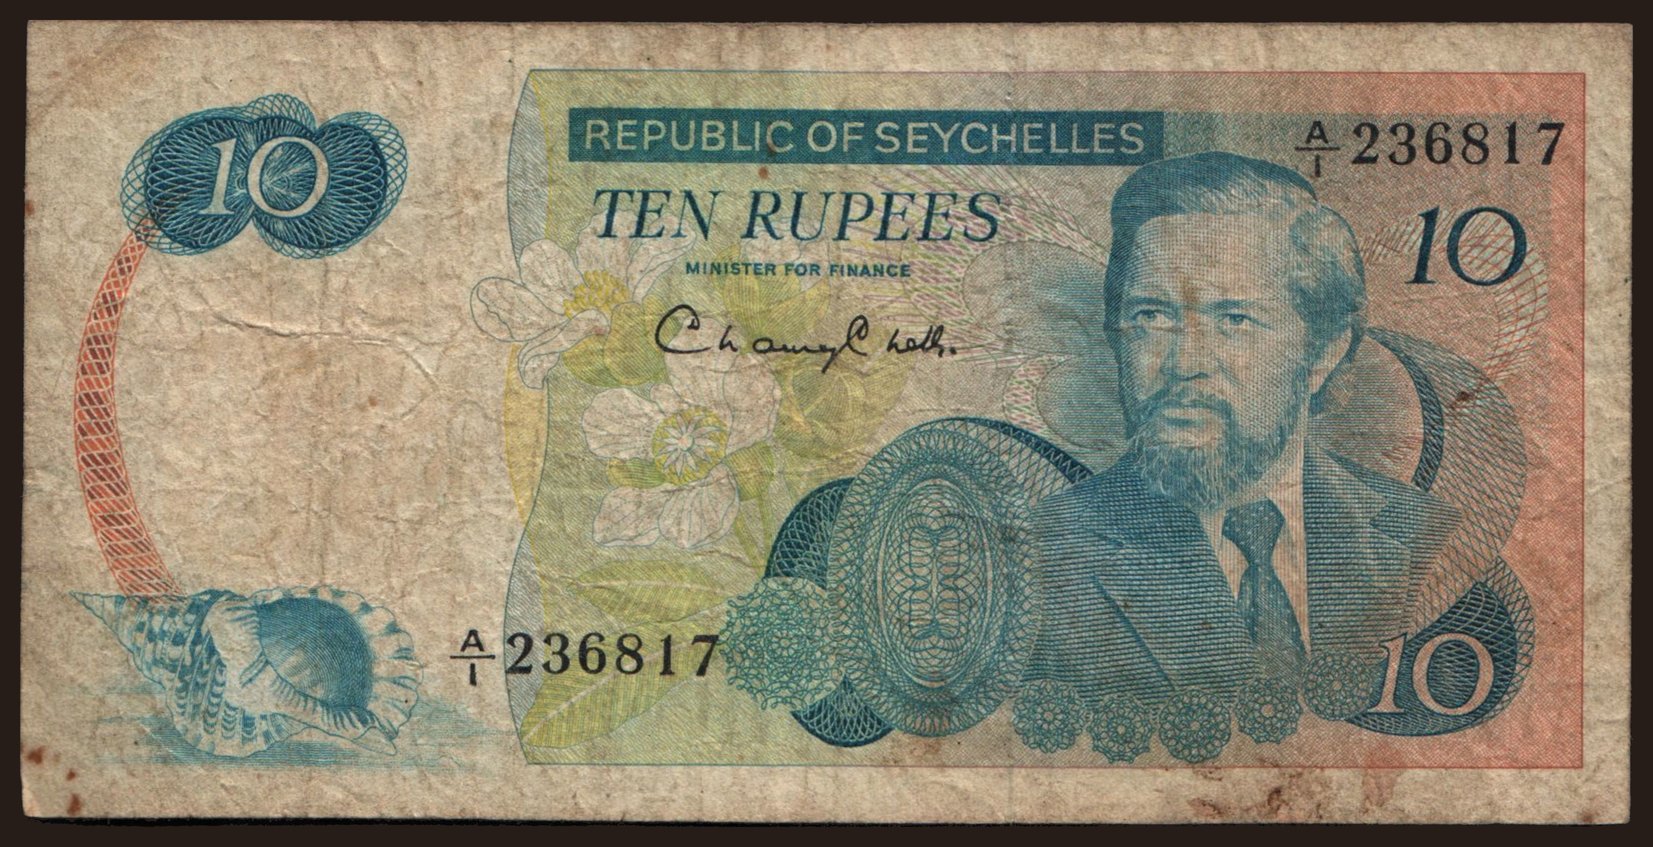 10 rupees, 1976